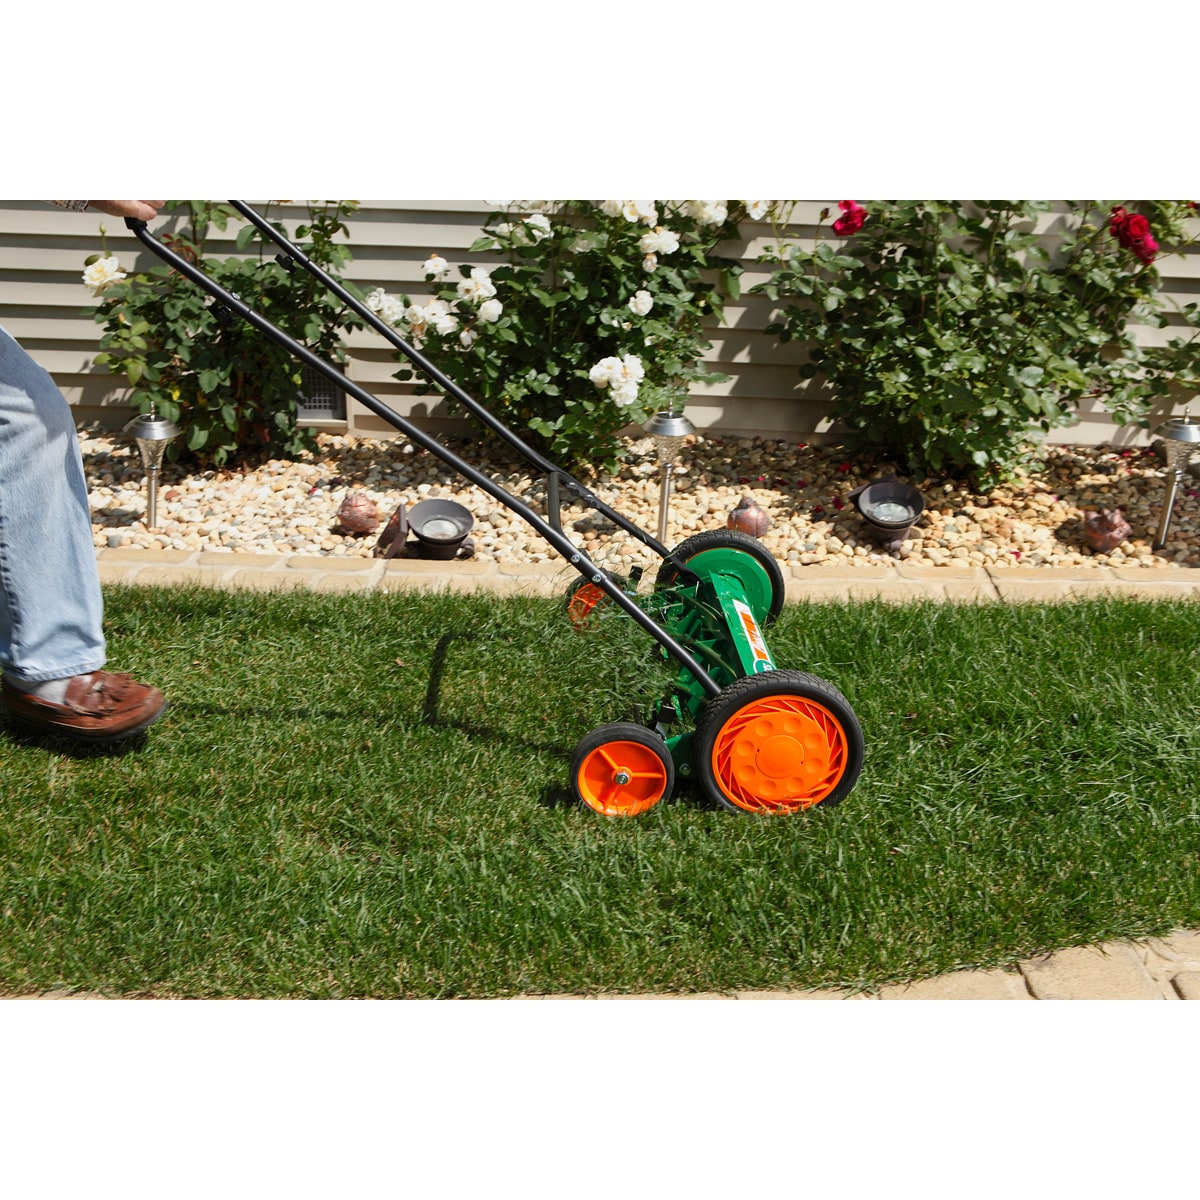 Scotts 20 in. Reel Mower with Grass Catcher for Sale in Anaheim, CA -  OfferUp